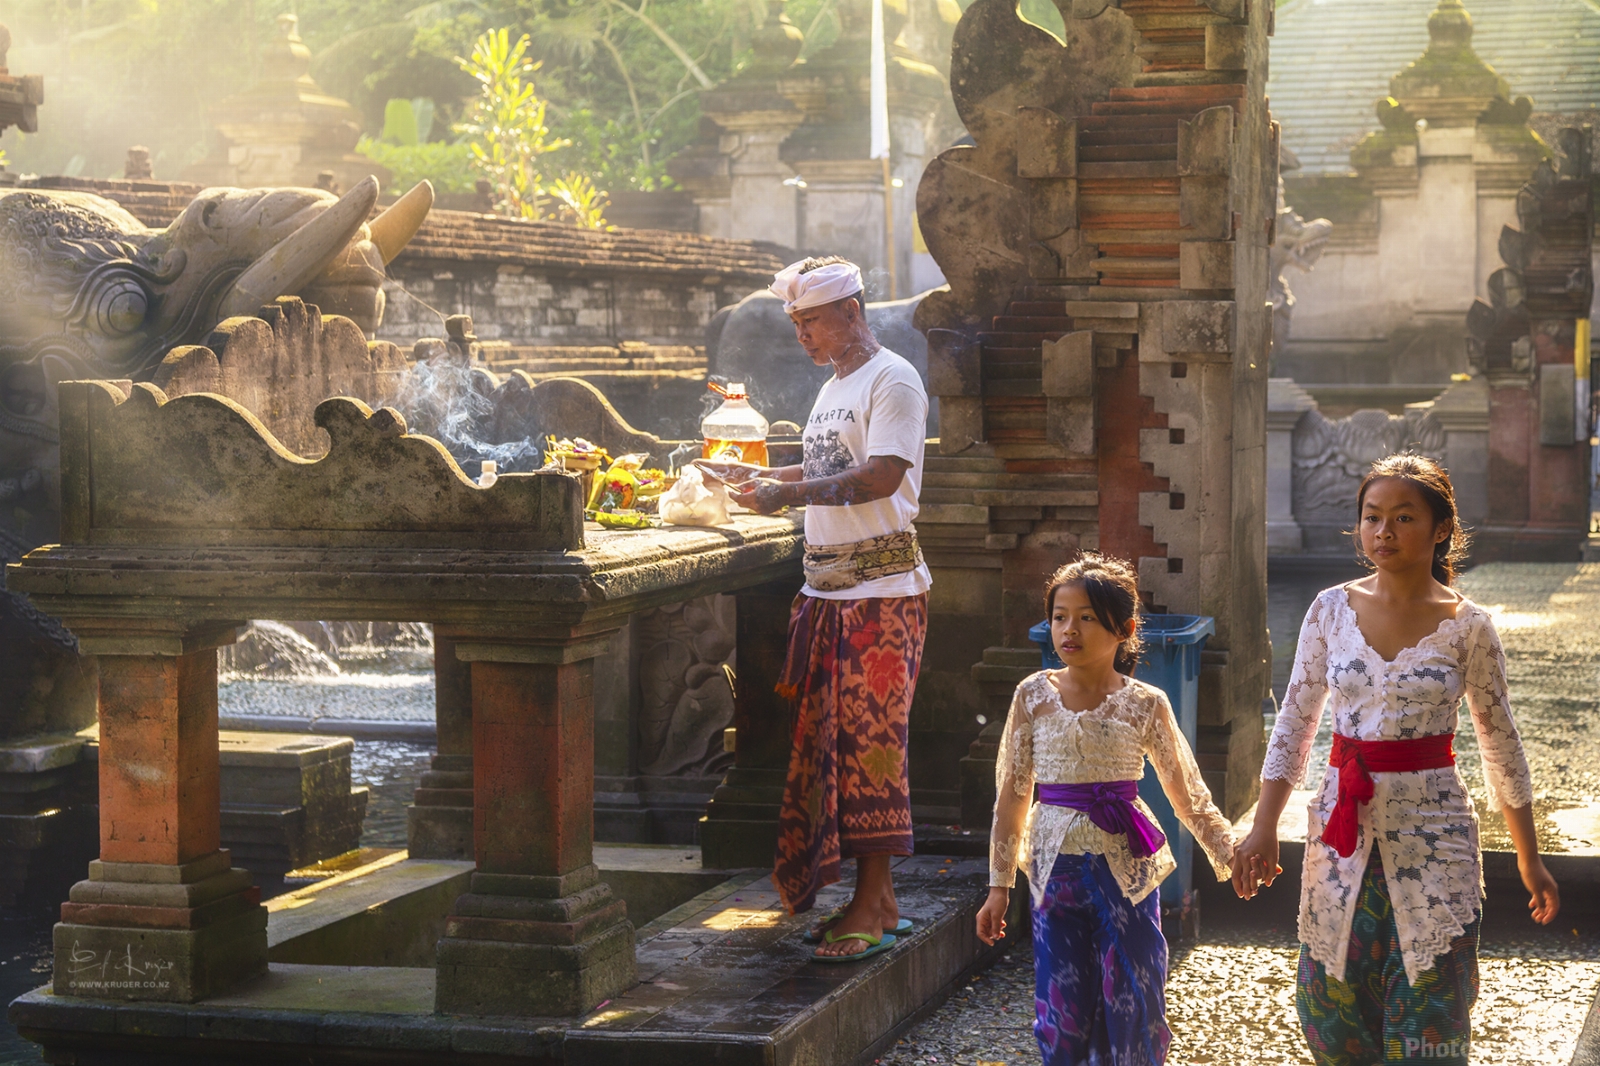 Image of Tirta Empul Temple by Ed Kruger